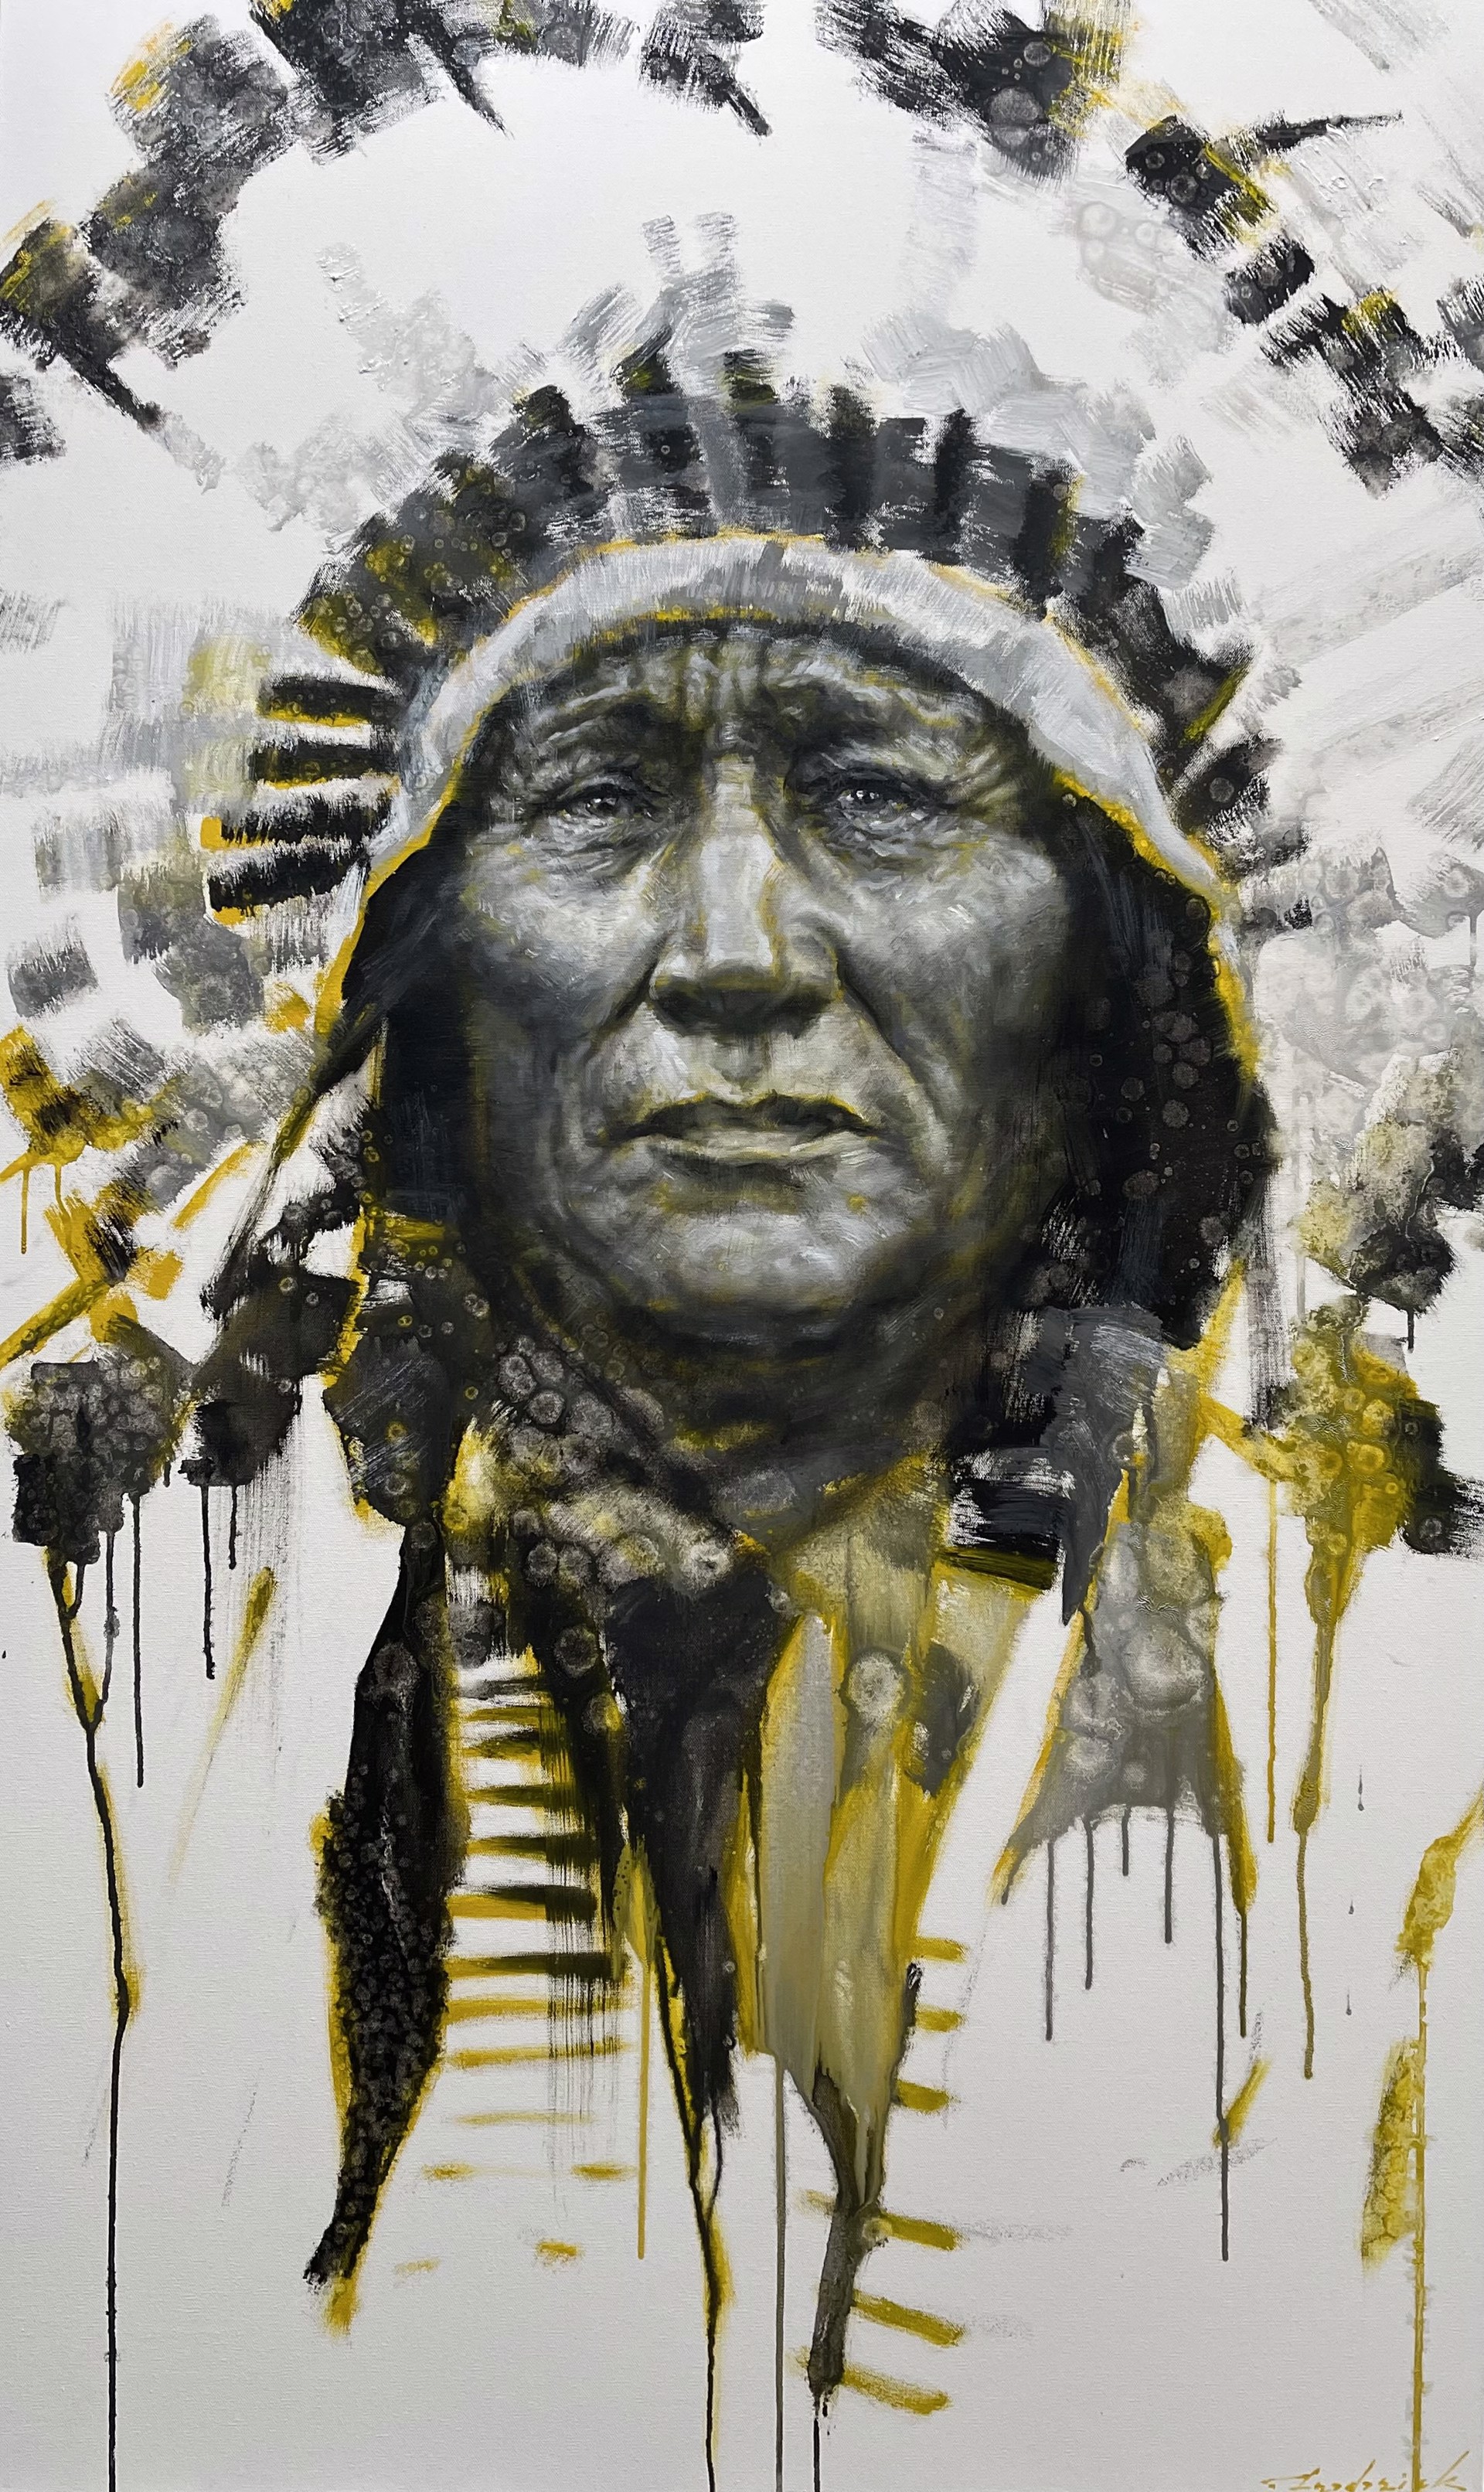 CHIEF IRON SHELL by David Frederick Riley